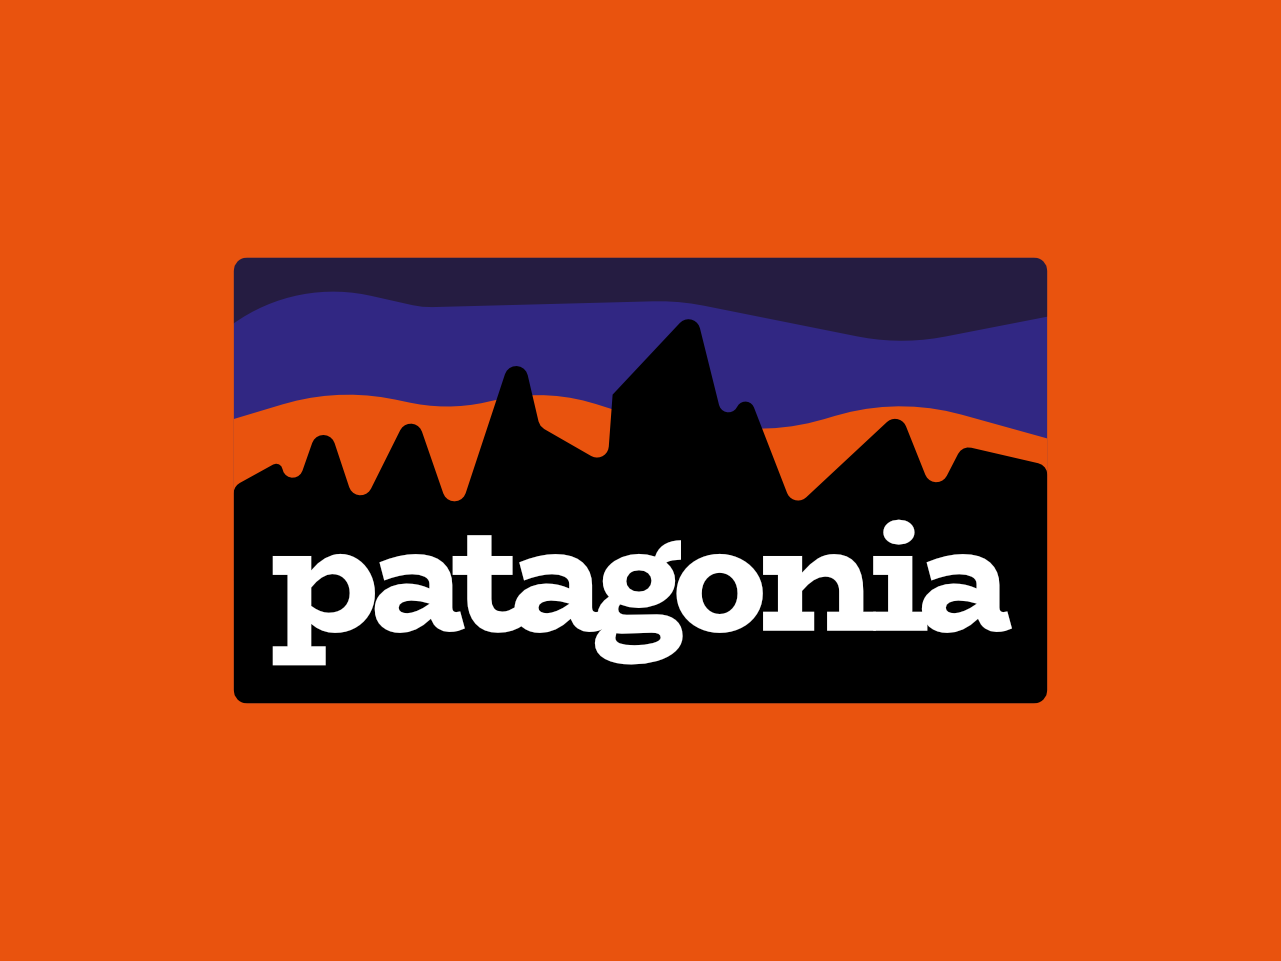 Come explore the wild beauty of Patagonia.